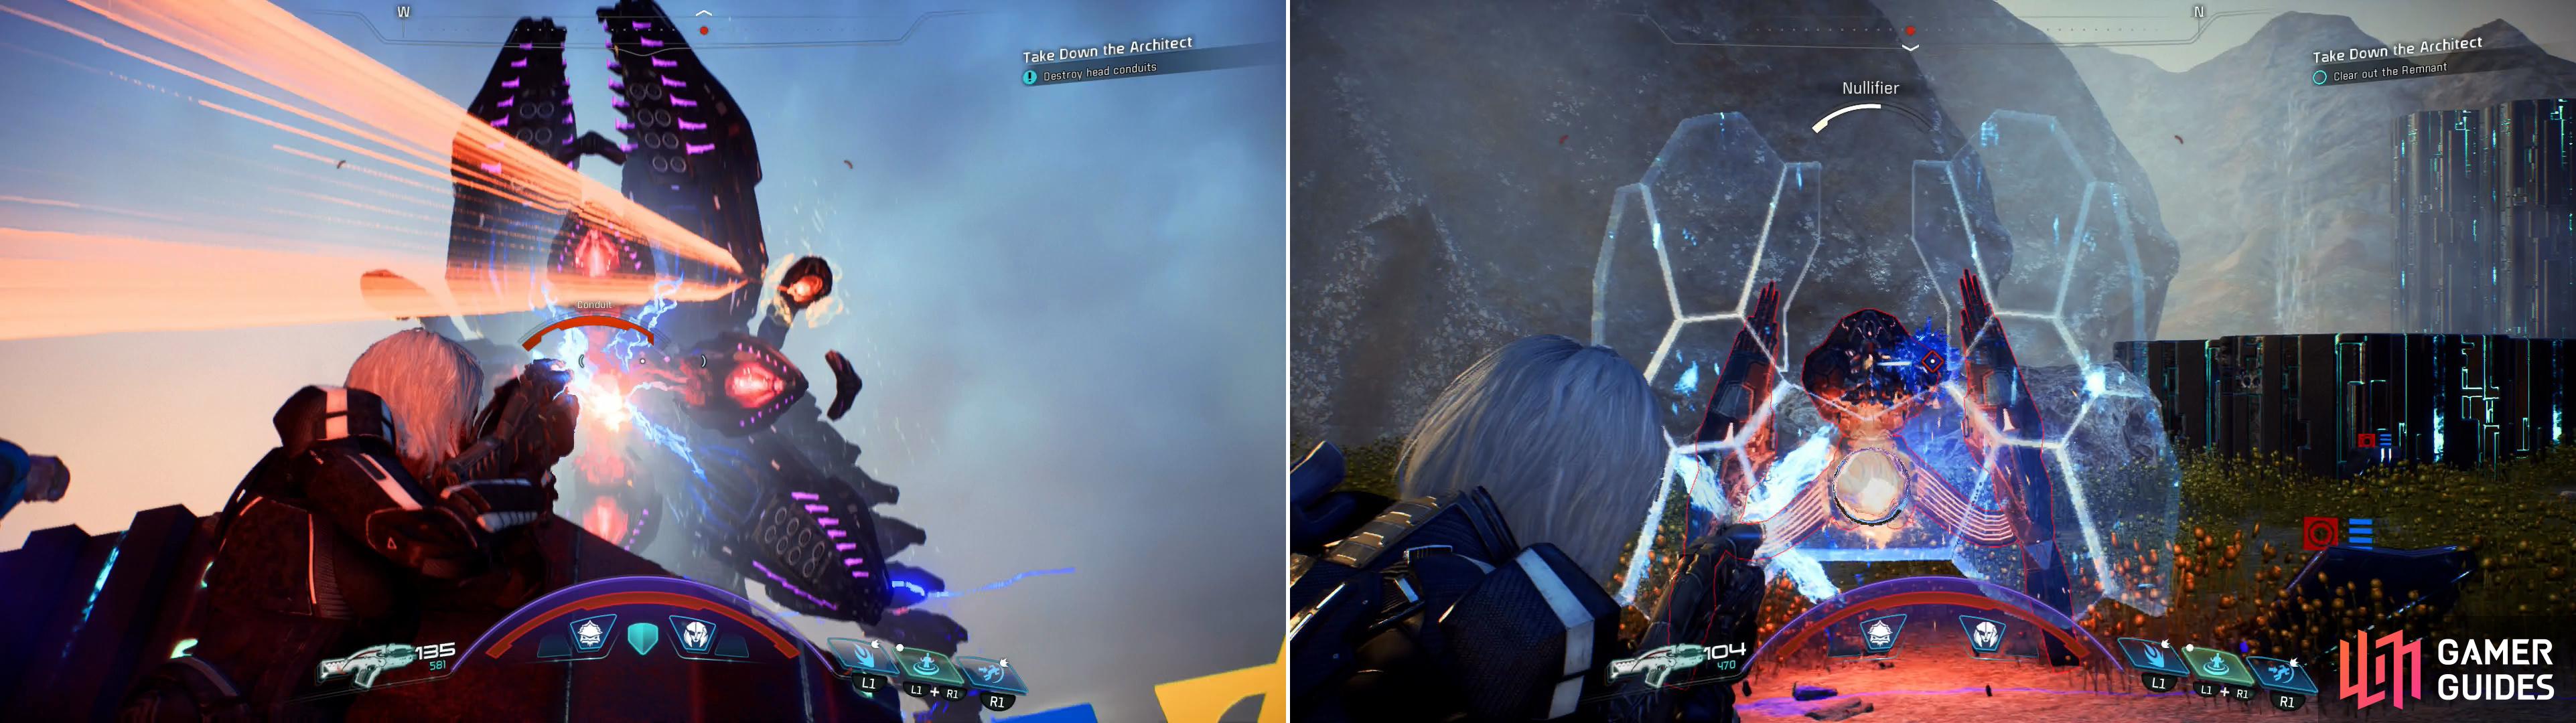 Stick in cover when the Architect fires its rapid laser attack (left) and dispatch the Remnant it periodically summons (right).